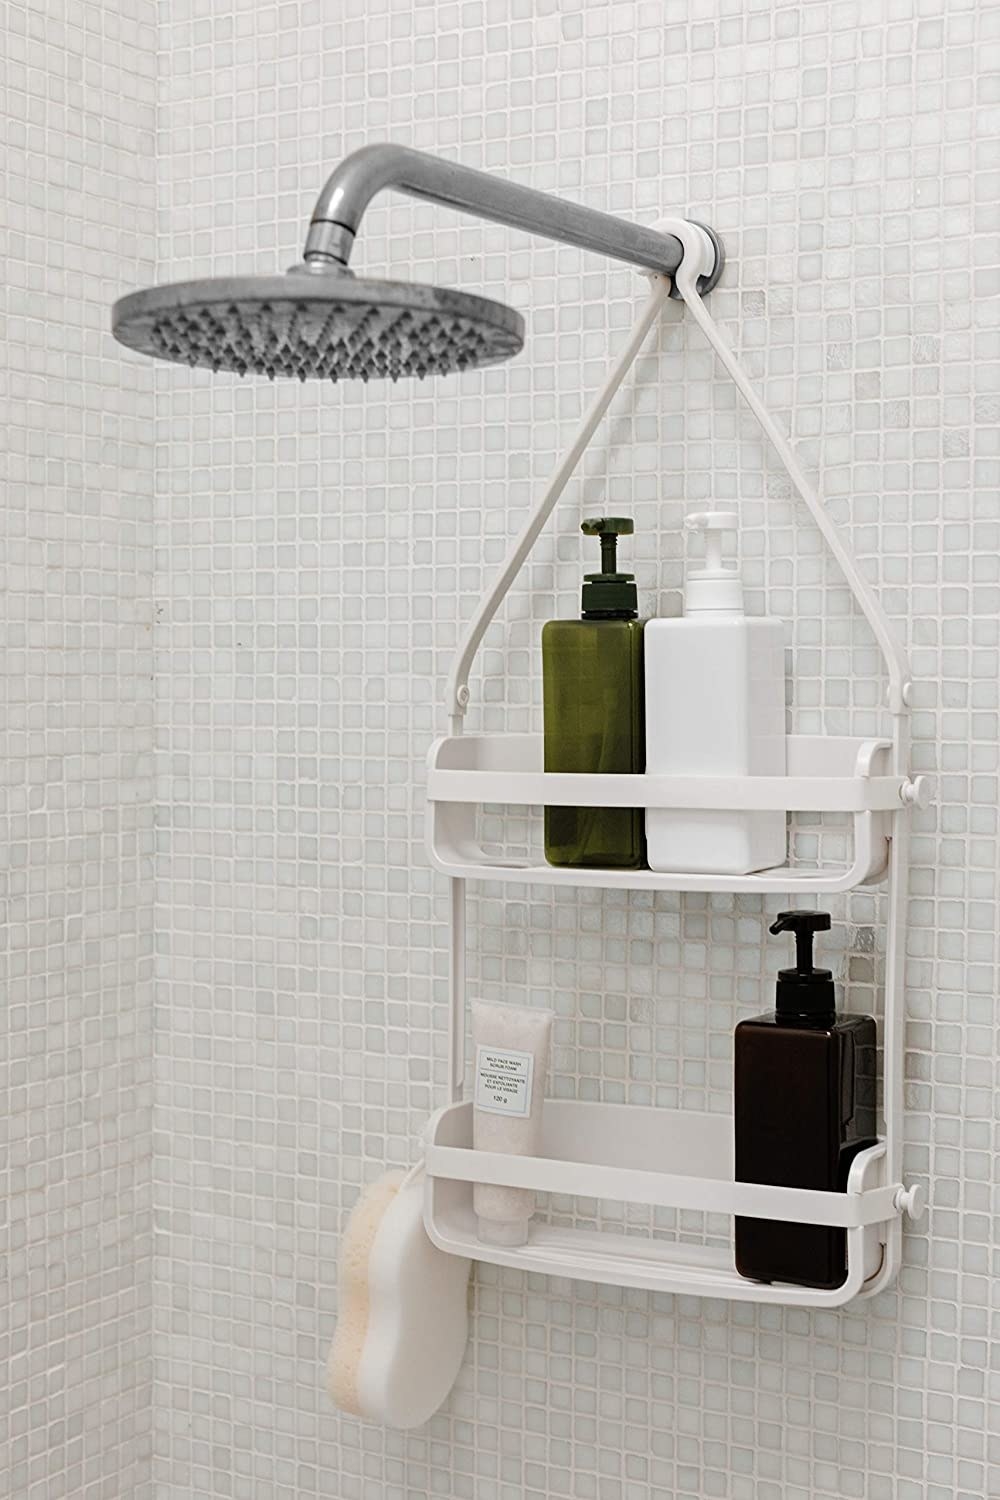 A two tiered shower caddy hanging from a shower hose